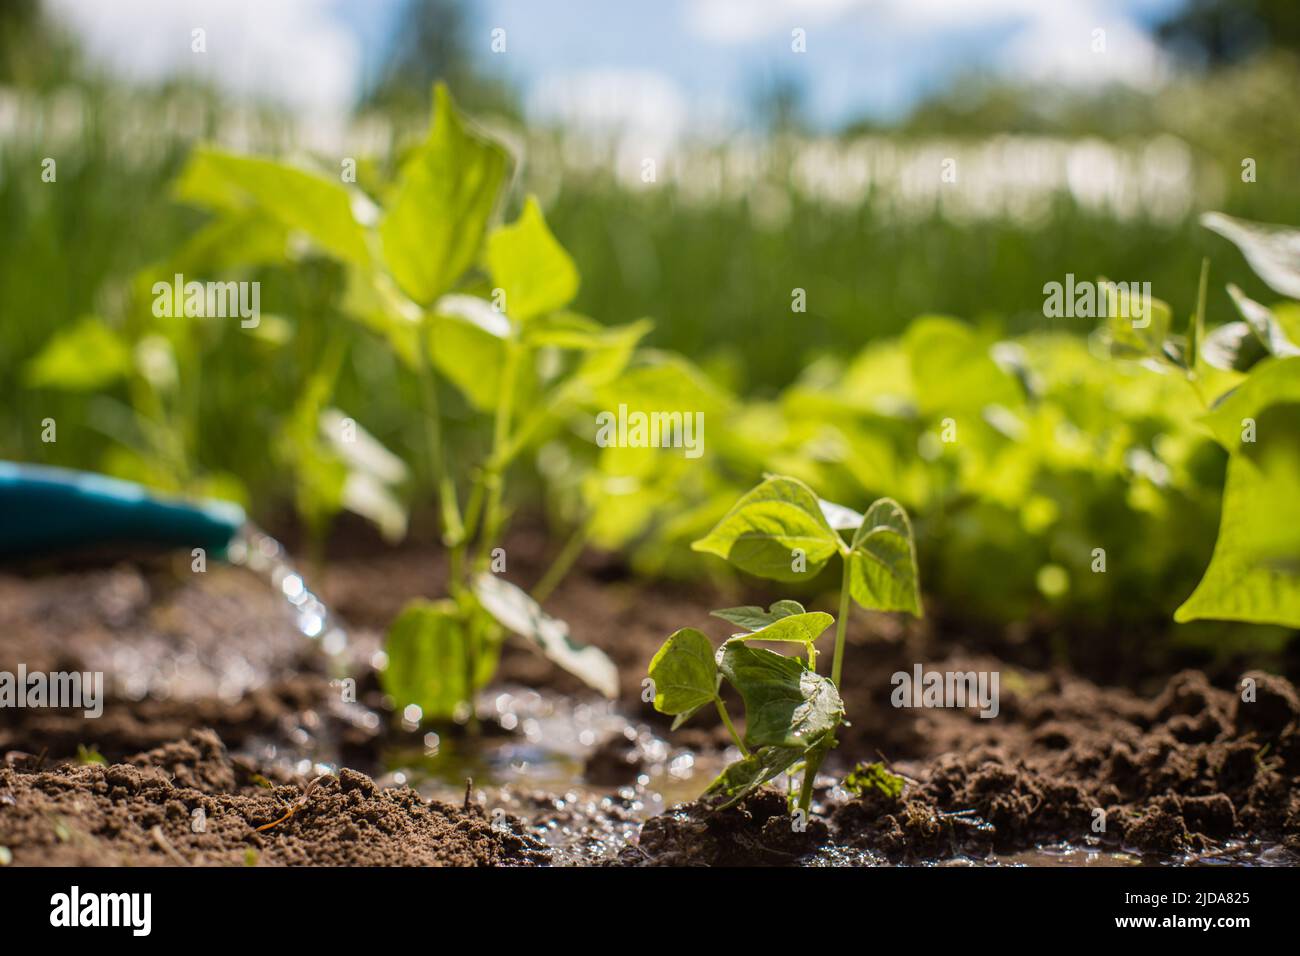 Watering vegetable plants on a plantation in the summer heat with a watering can. Gardening concept. Agriculture plants growing in bed row. Stock Photo